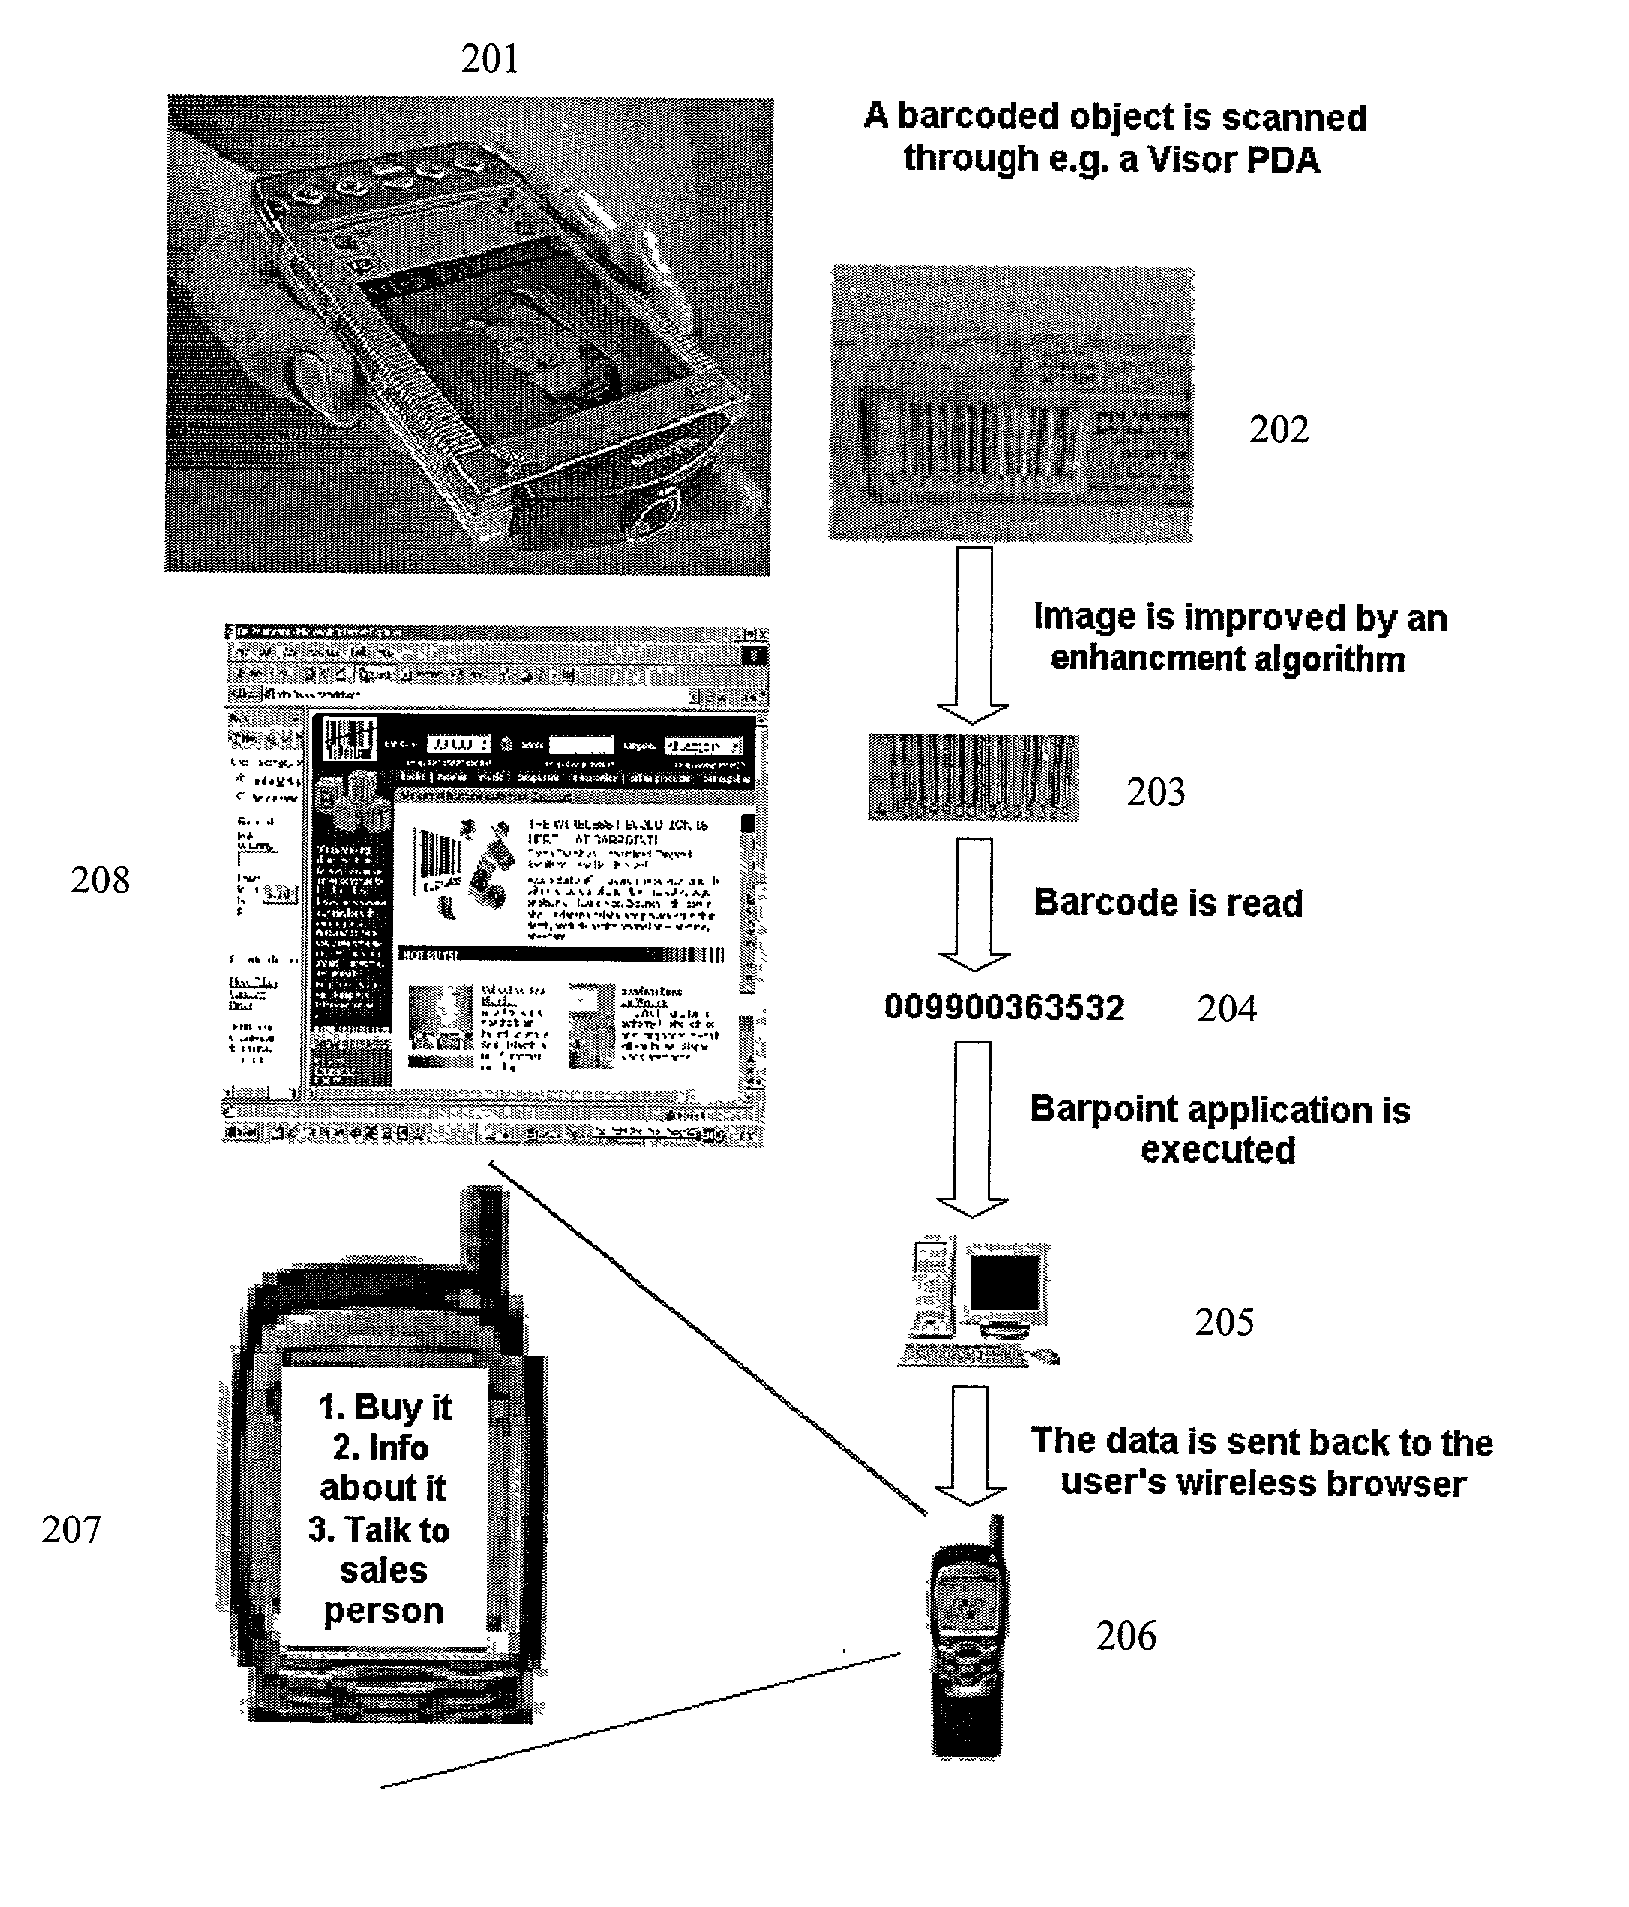 Object identification method for portable devices